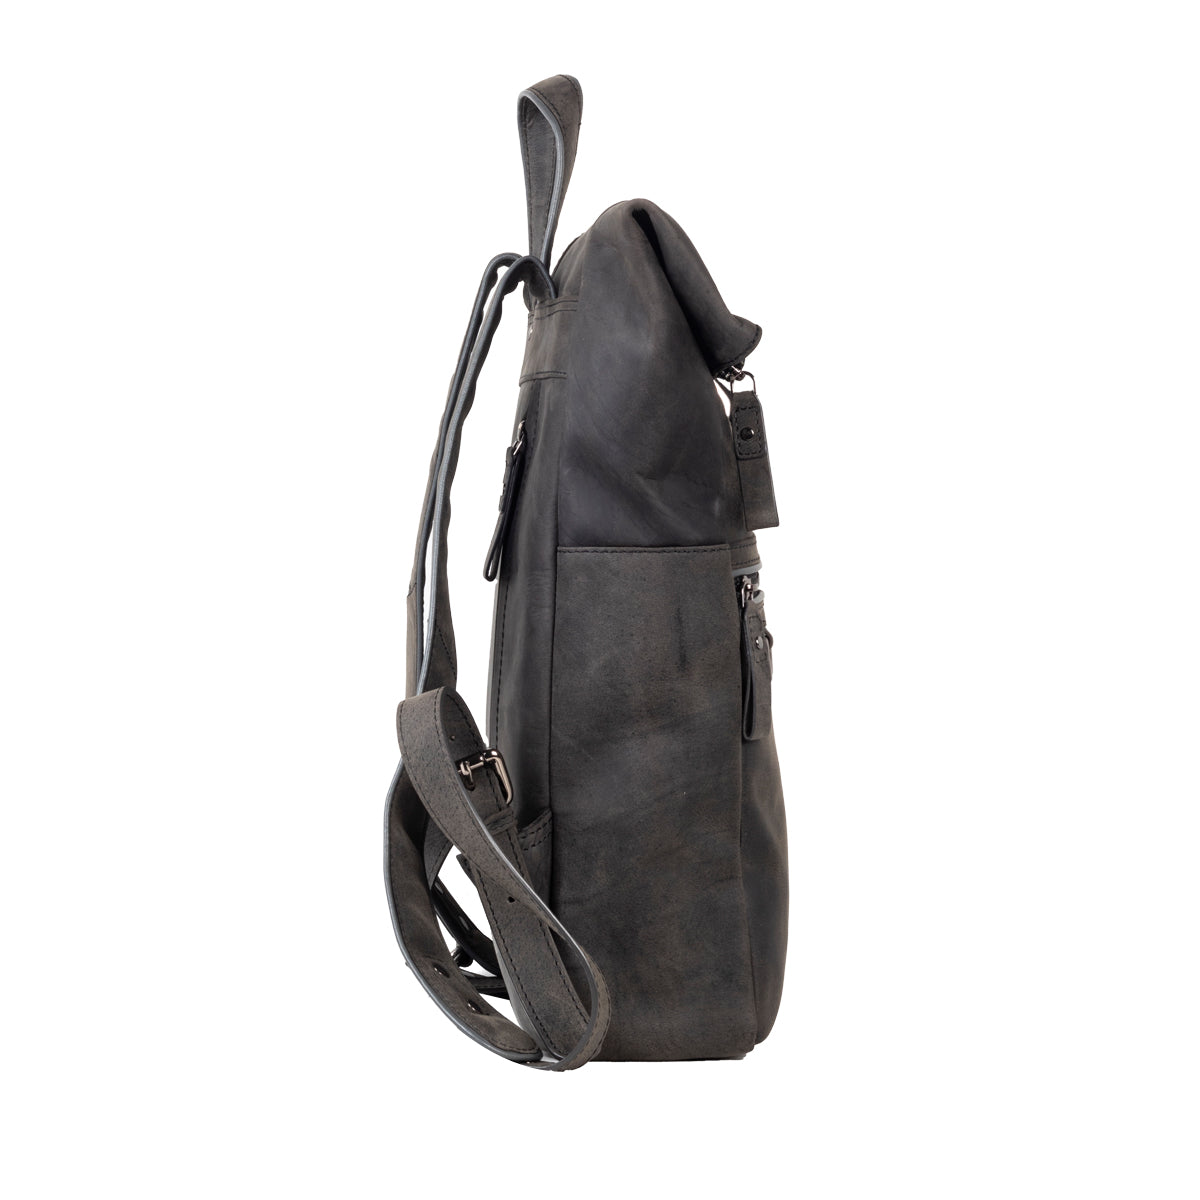 Roll top backpack Elouise 